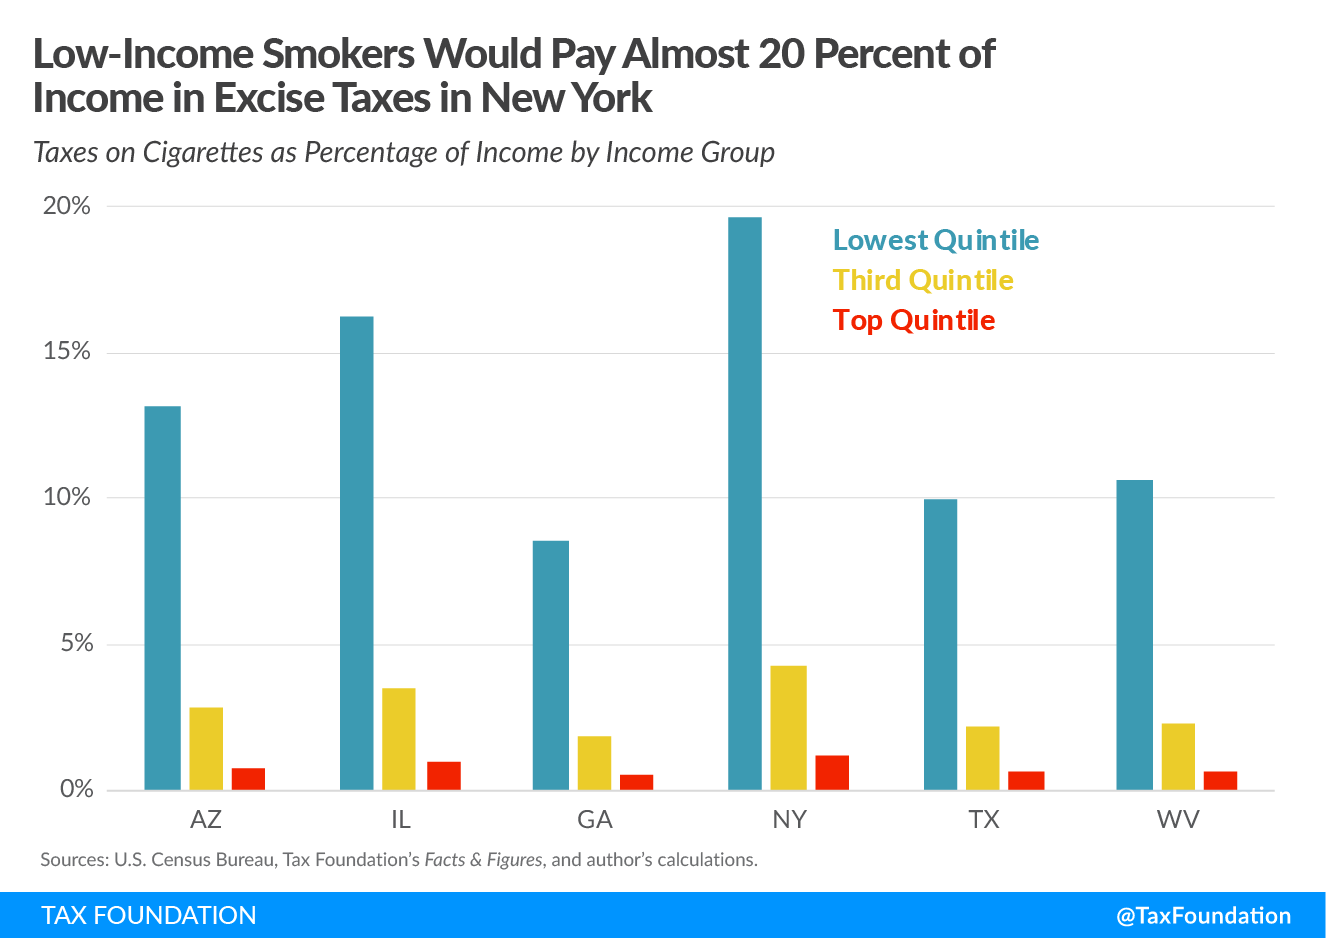 Low-Income Smokers Would Pay Almost 20 Percent of Income in Excise Taxes in New York. Federal tobacco tax proposal, Tobacco Tax Equity Act, would impose a federal excise tax on tobacco federal cig